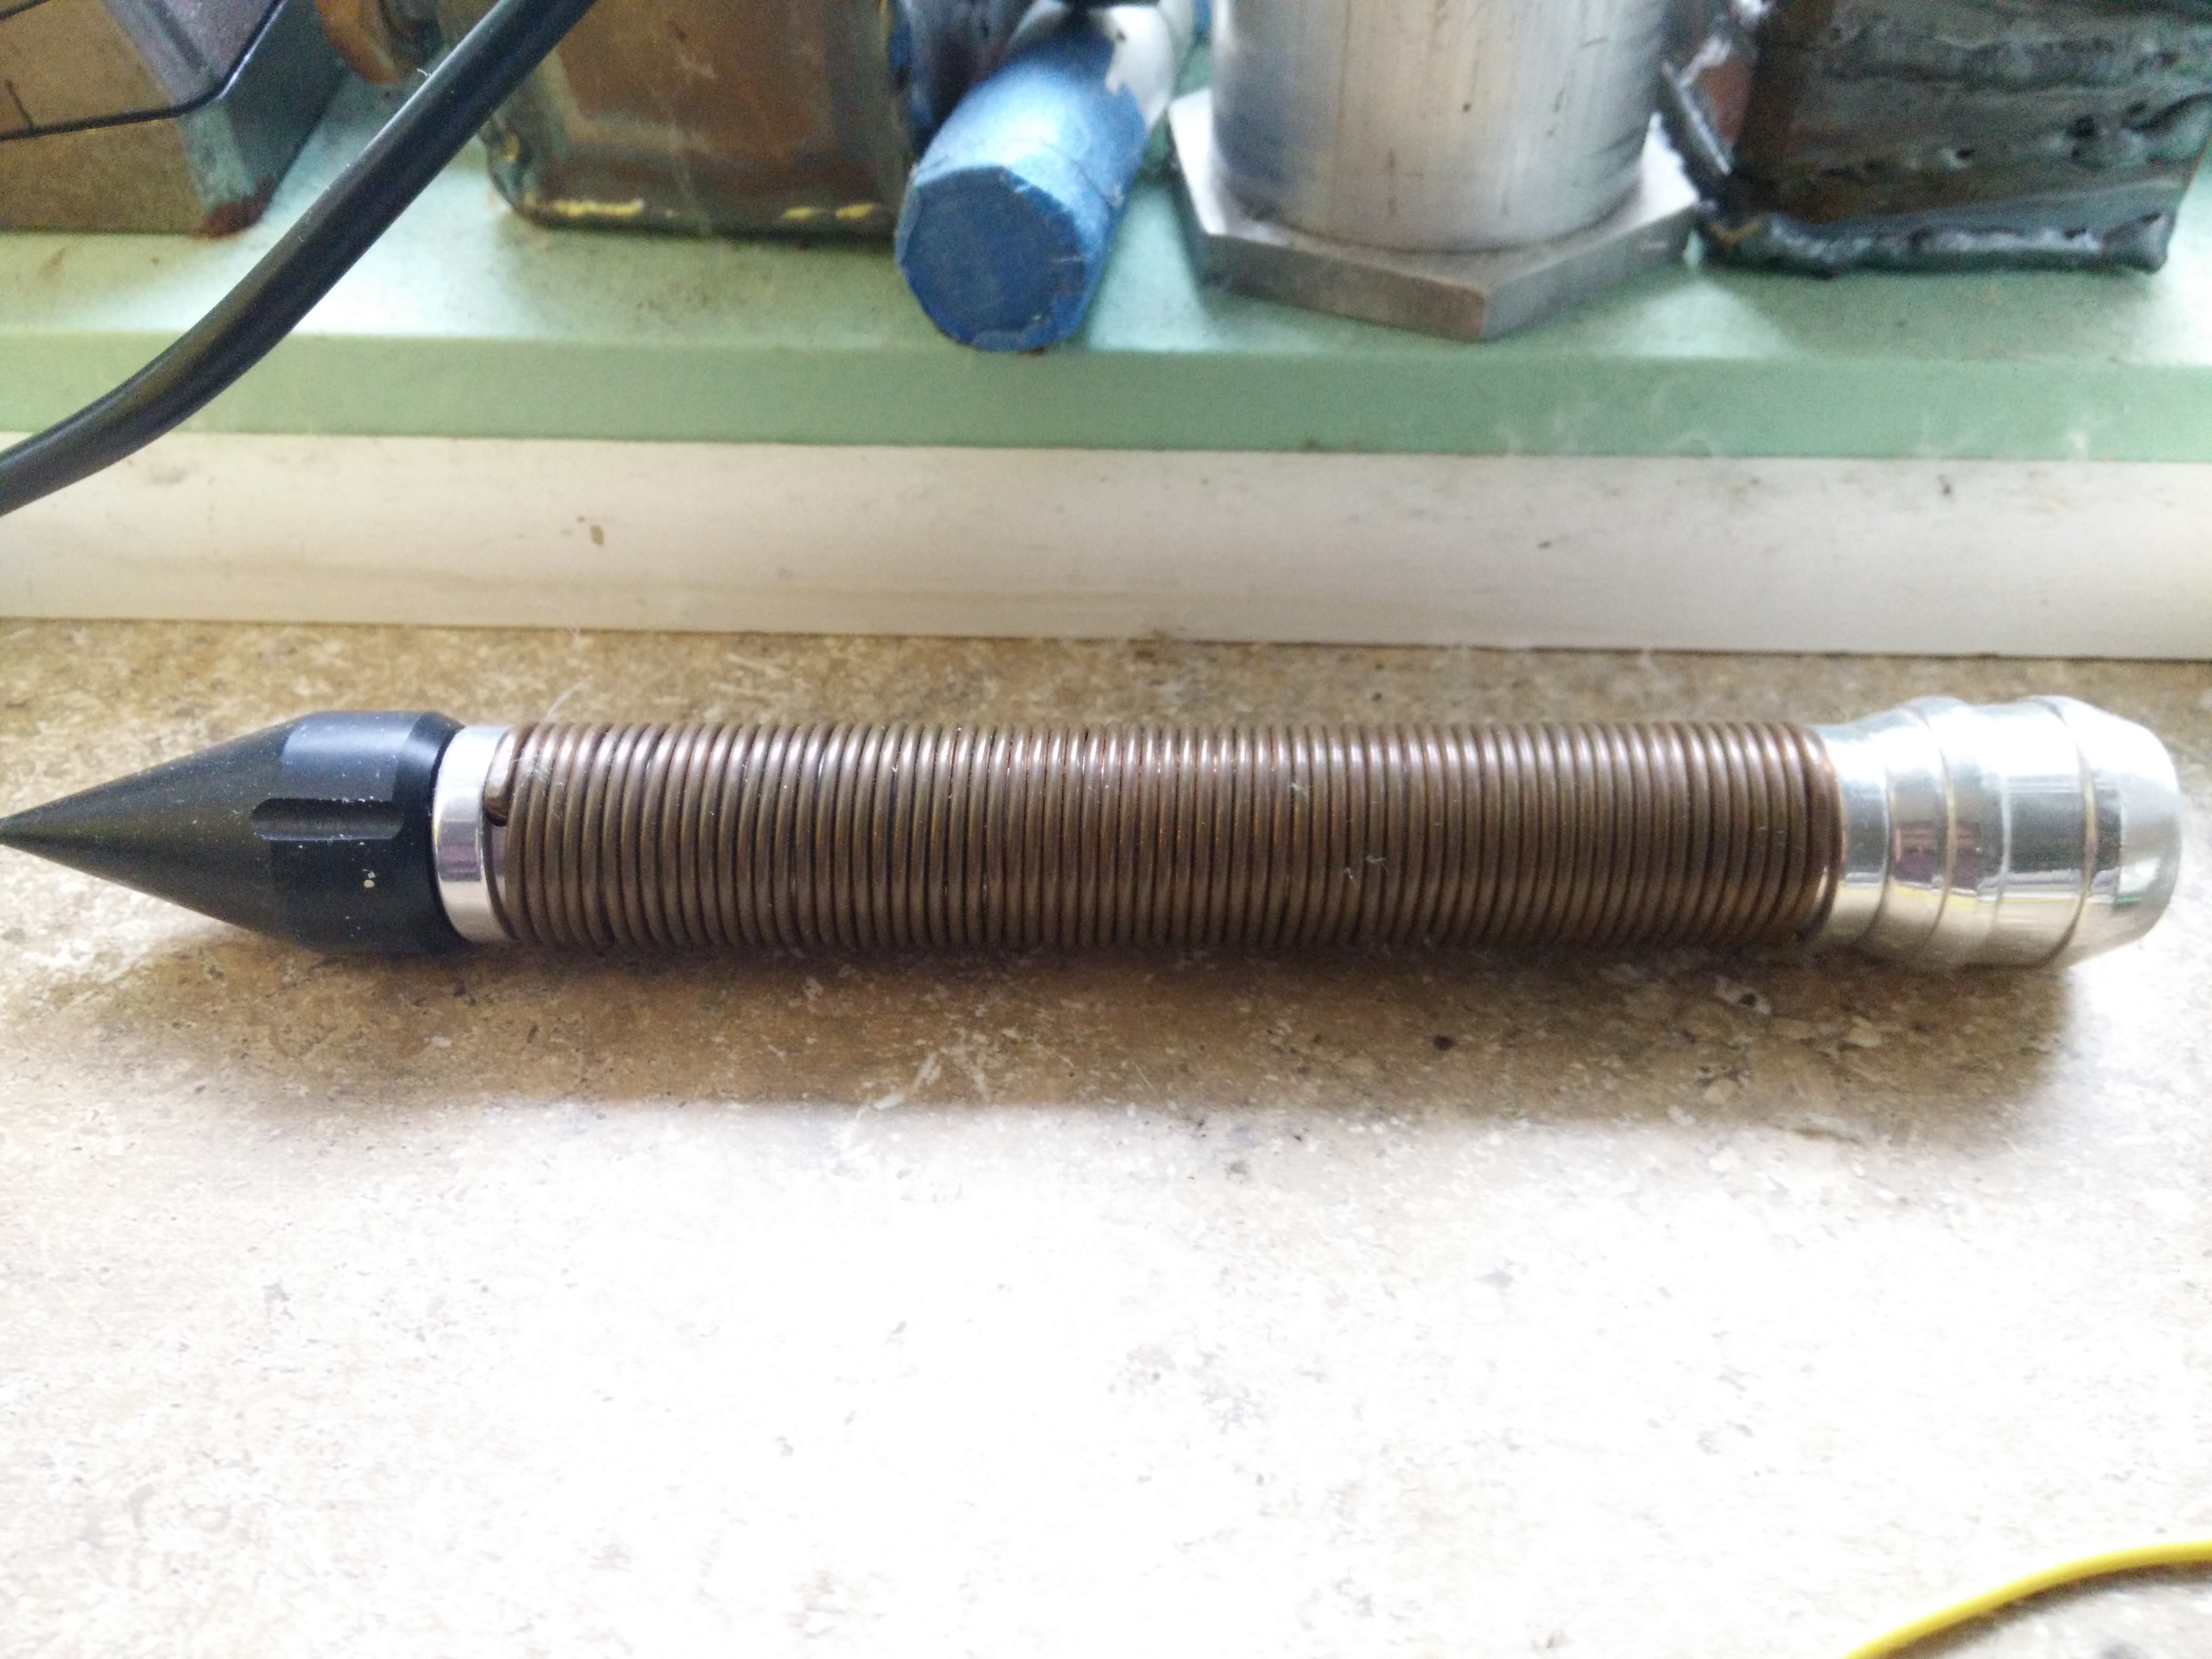 The Sonic Screwdriver that I made